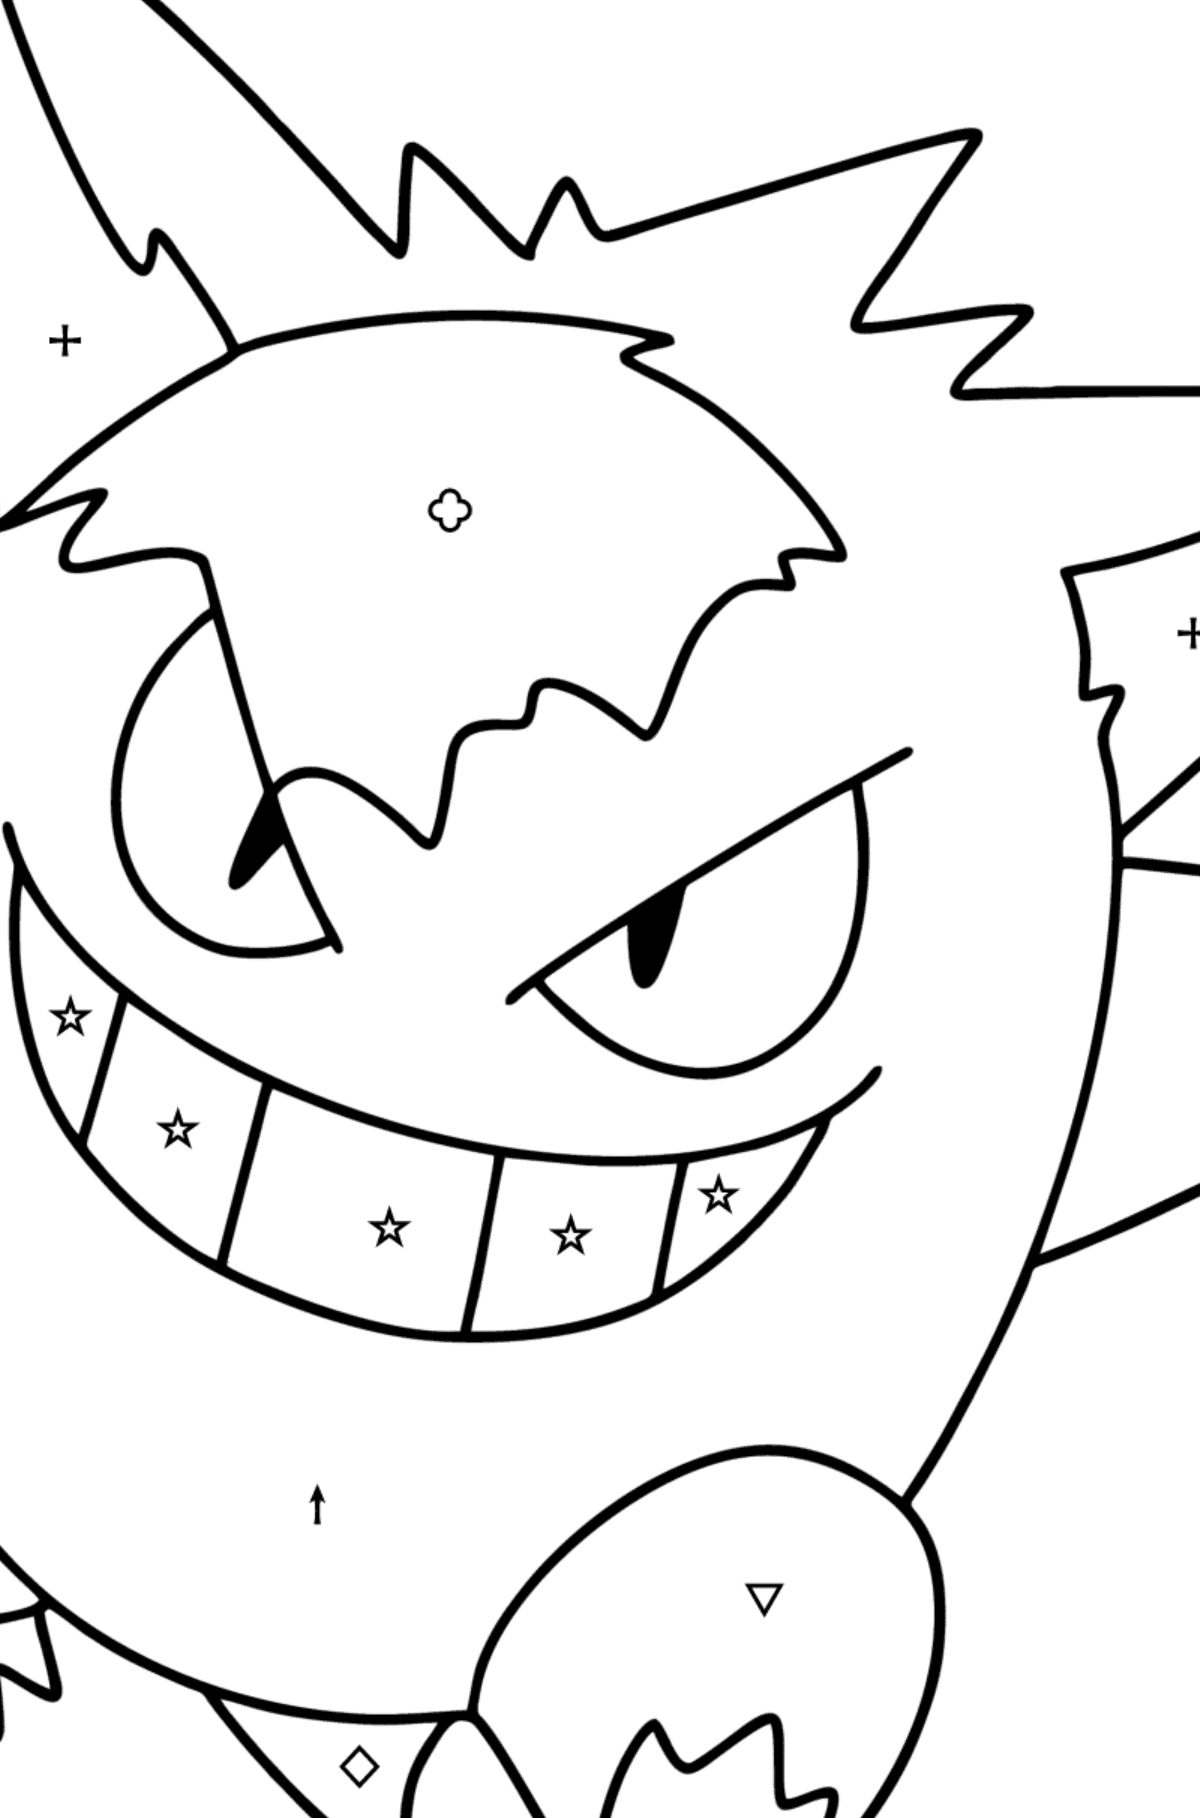 Pokémon Go Gengar coloring page - Coloring by Symbols and Geometric Shapes for Kids